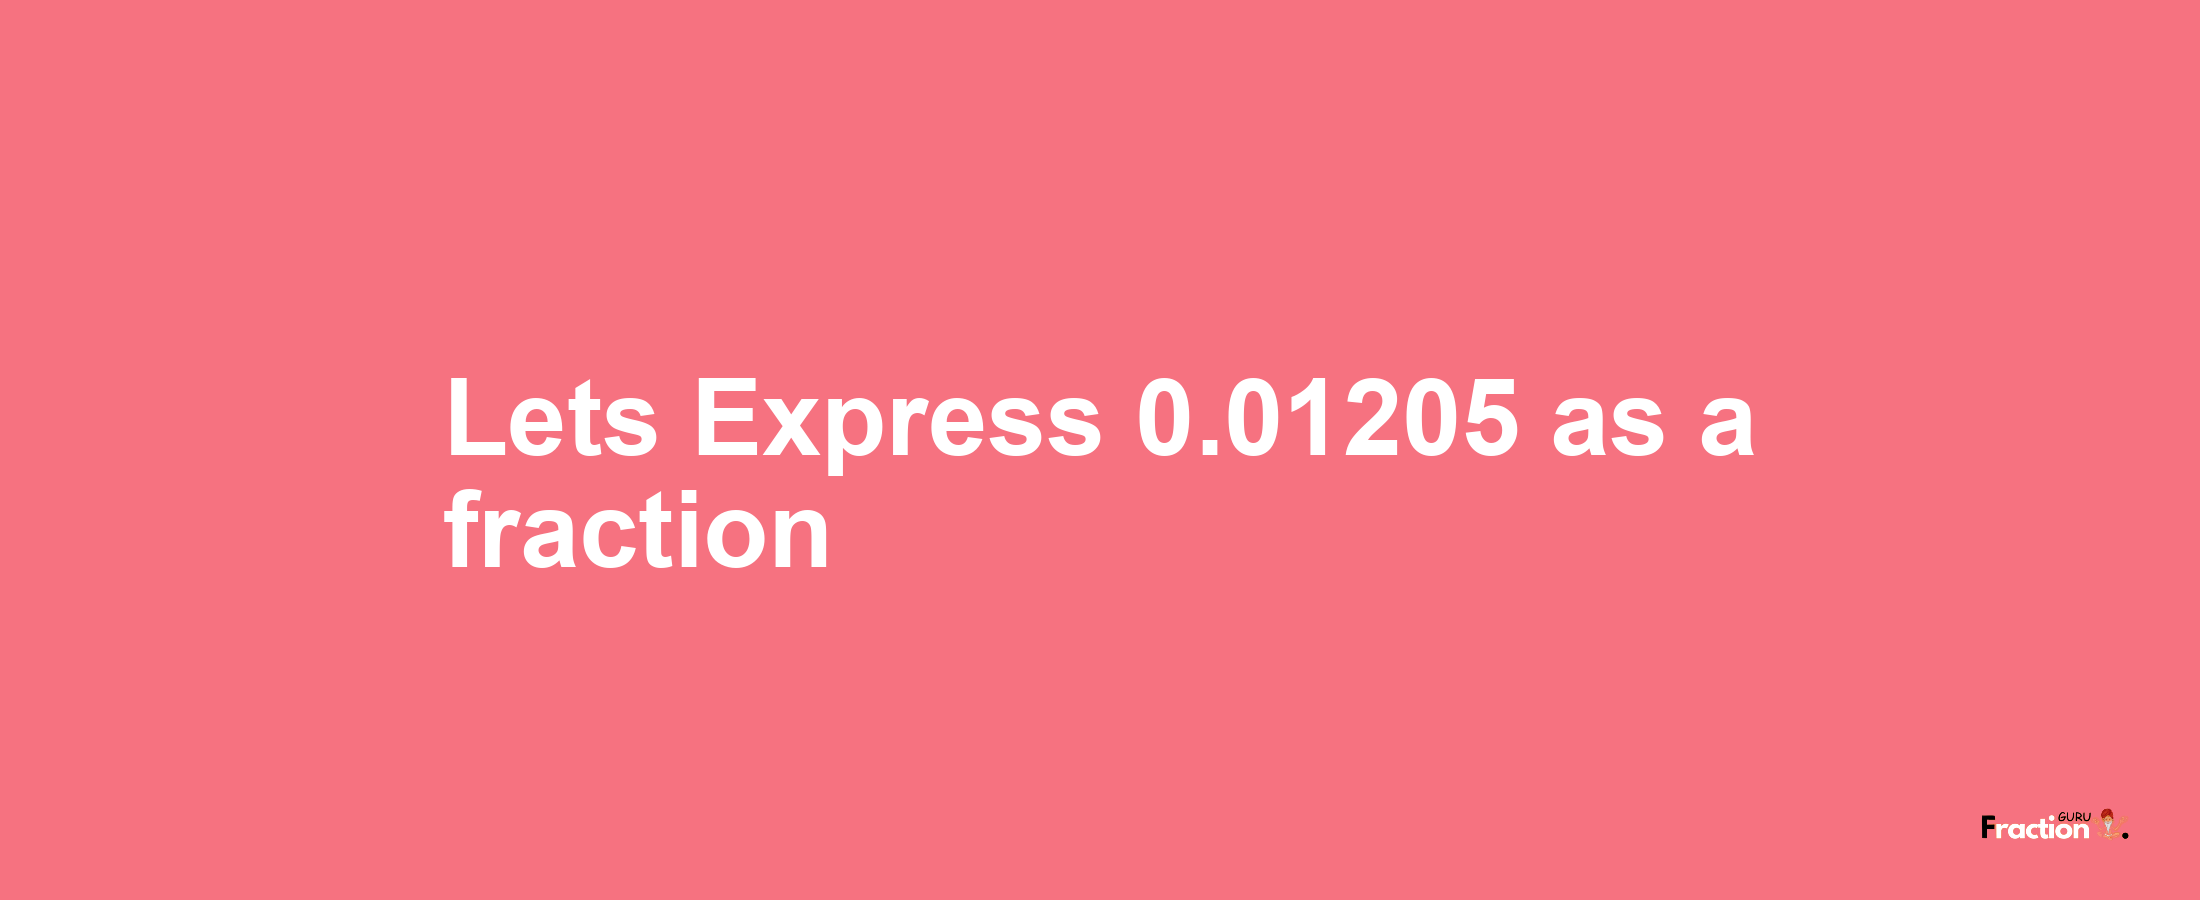 Lets Express 0.01205 as afraction